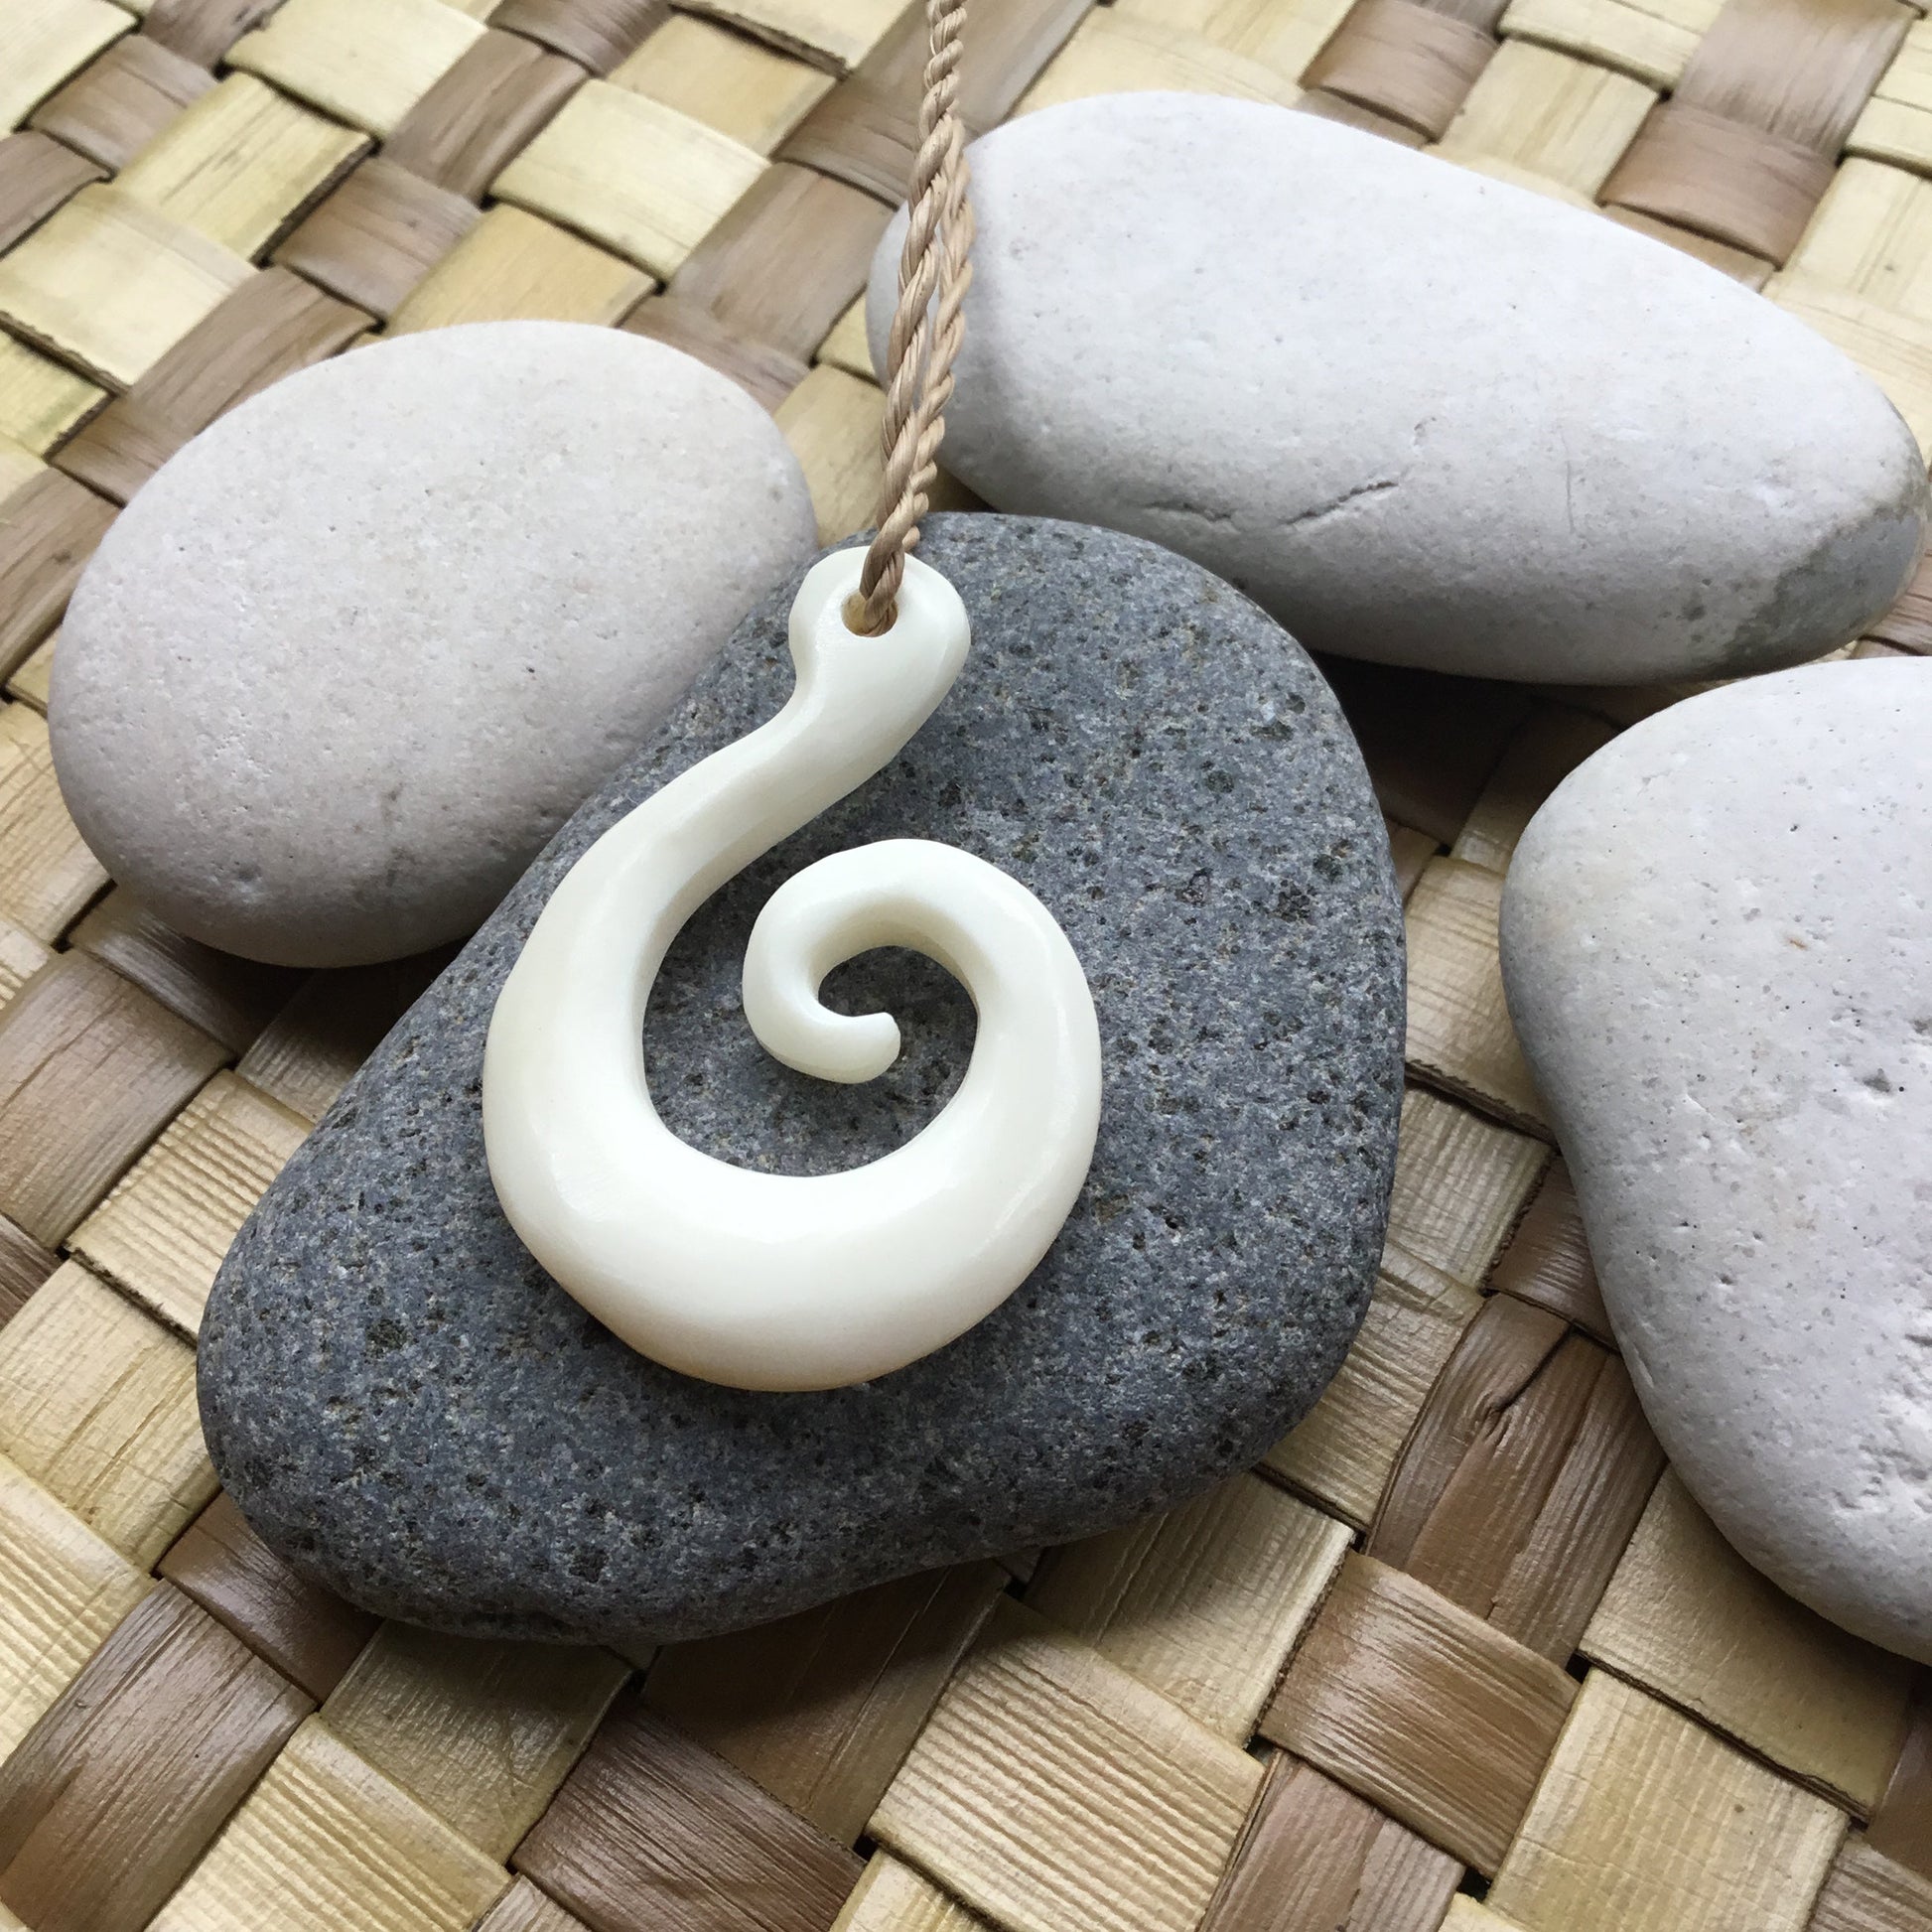 Buy Spiral Necklace